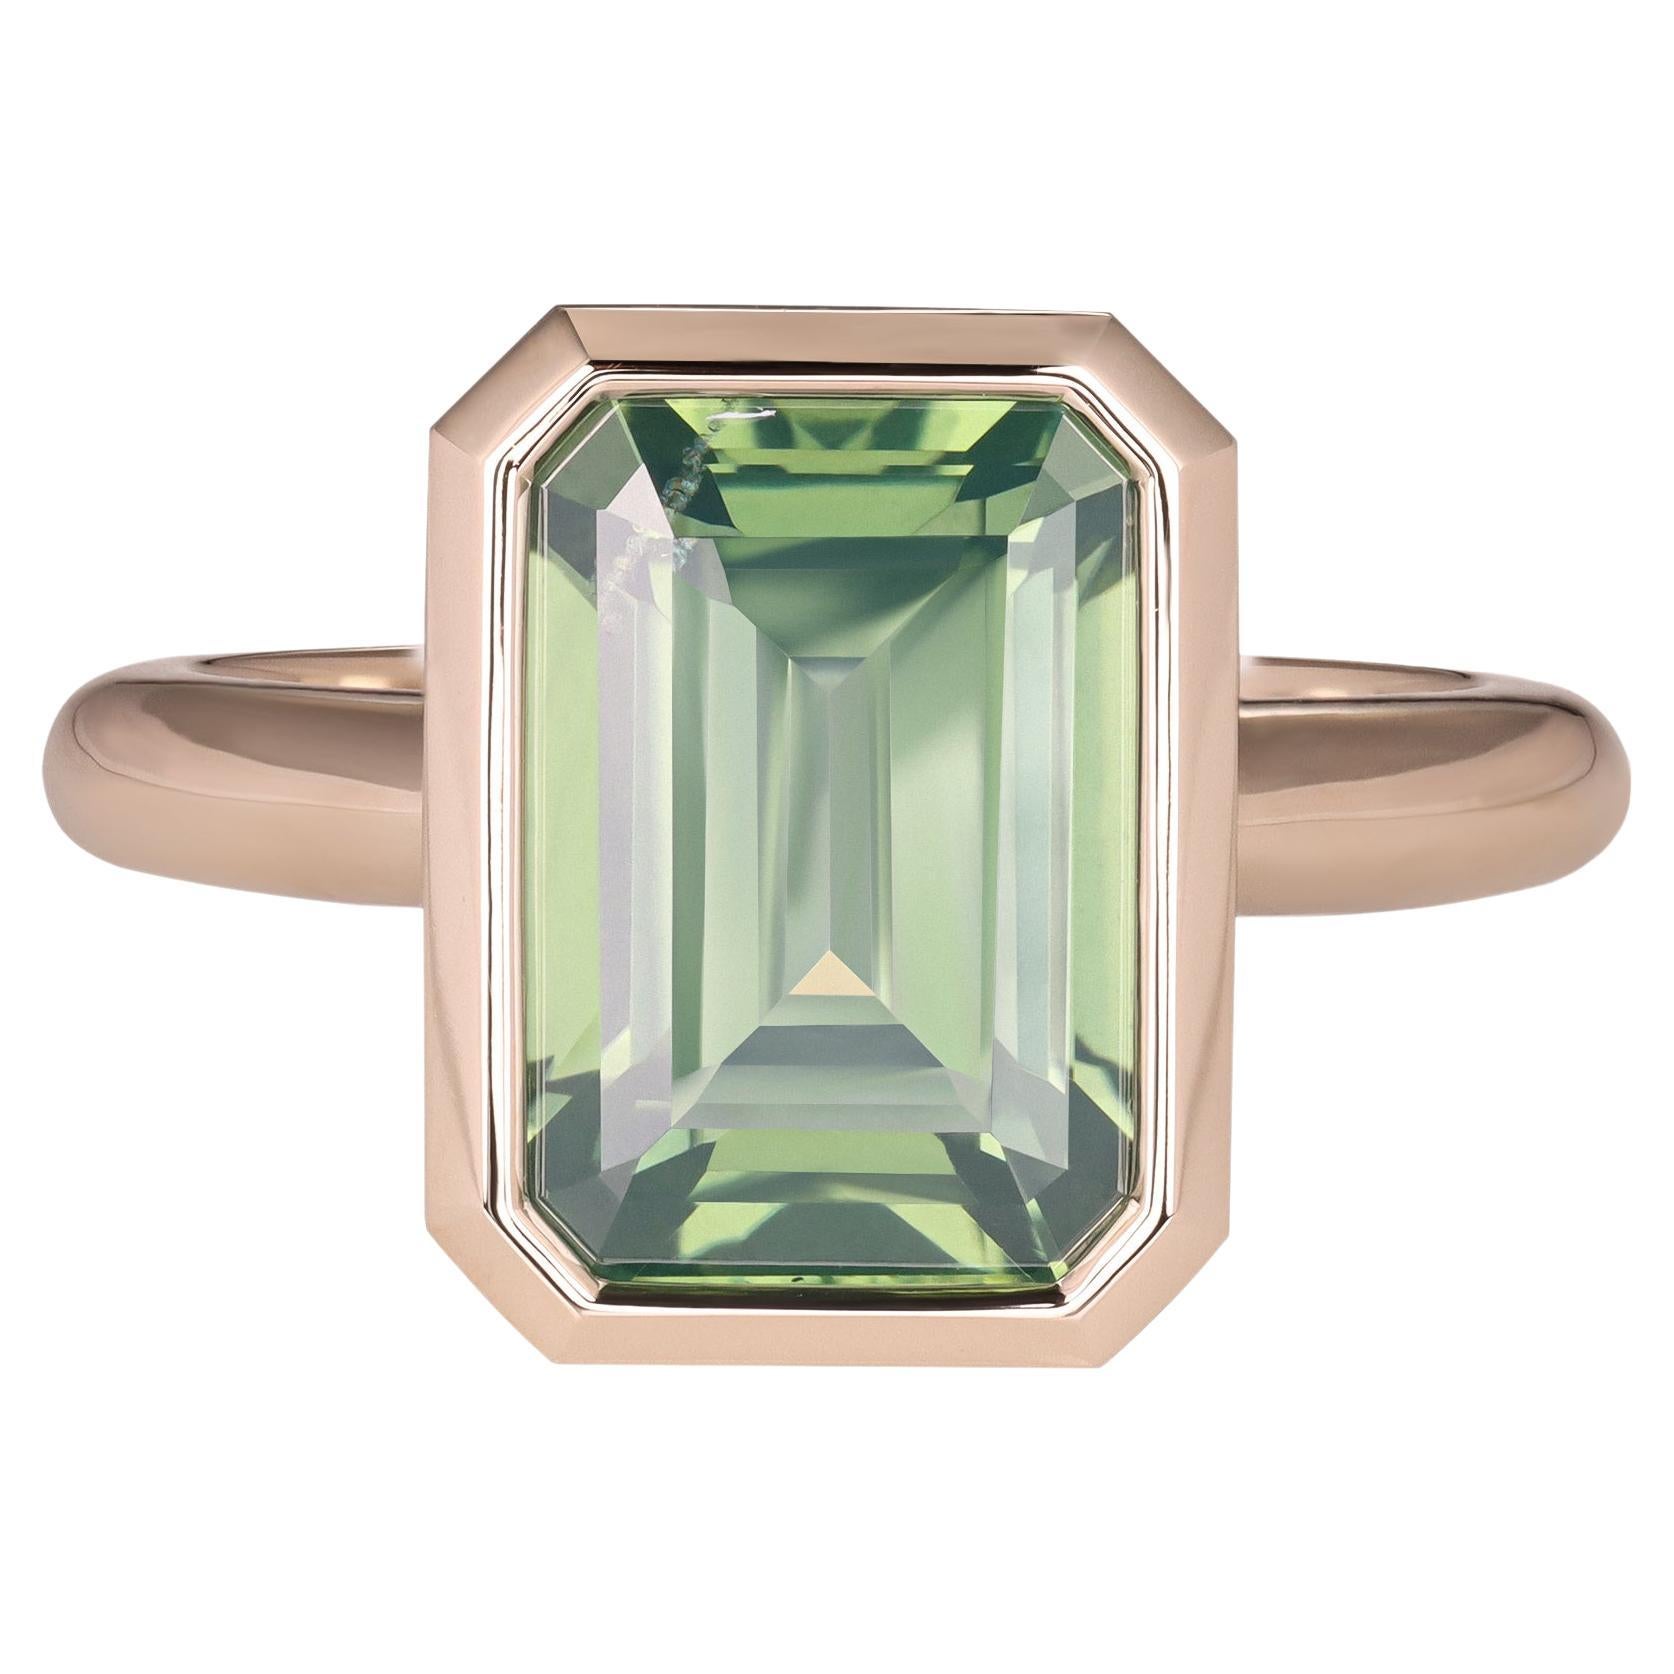 A Unique Green Zircon 7.40 ct Ring in 18K Gold Champagne Color